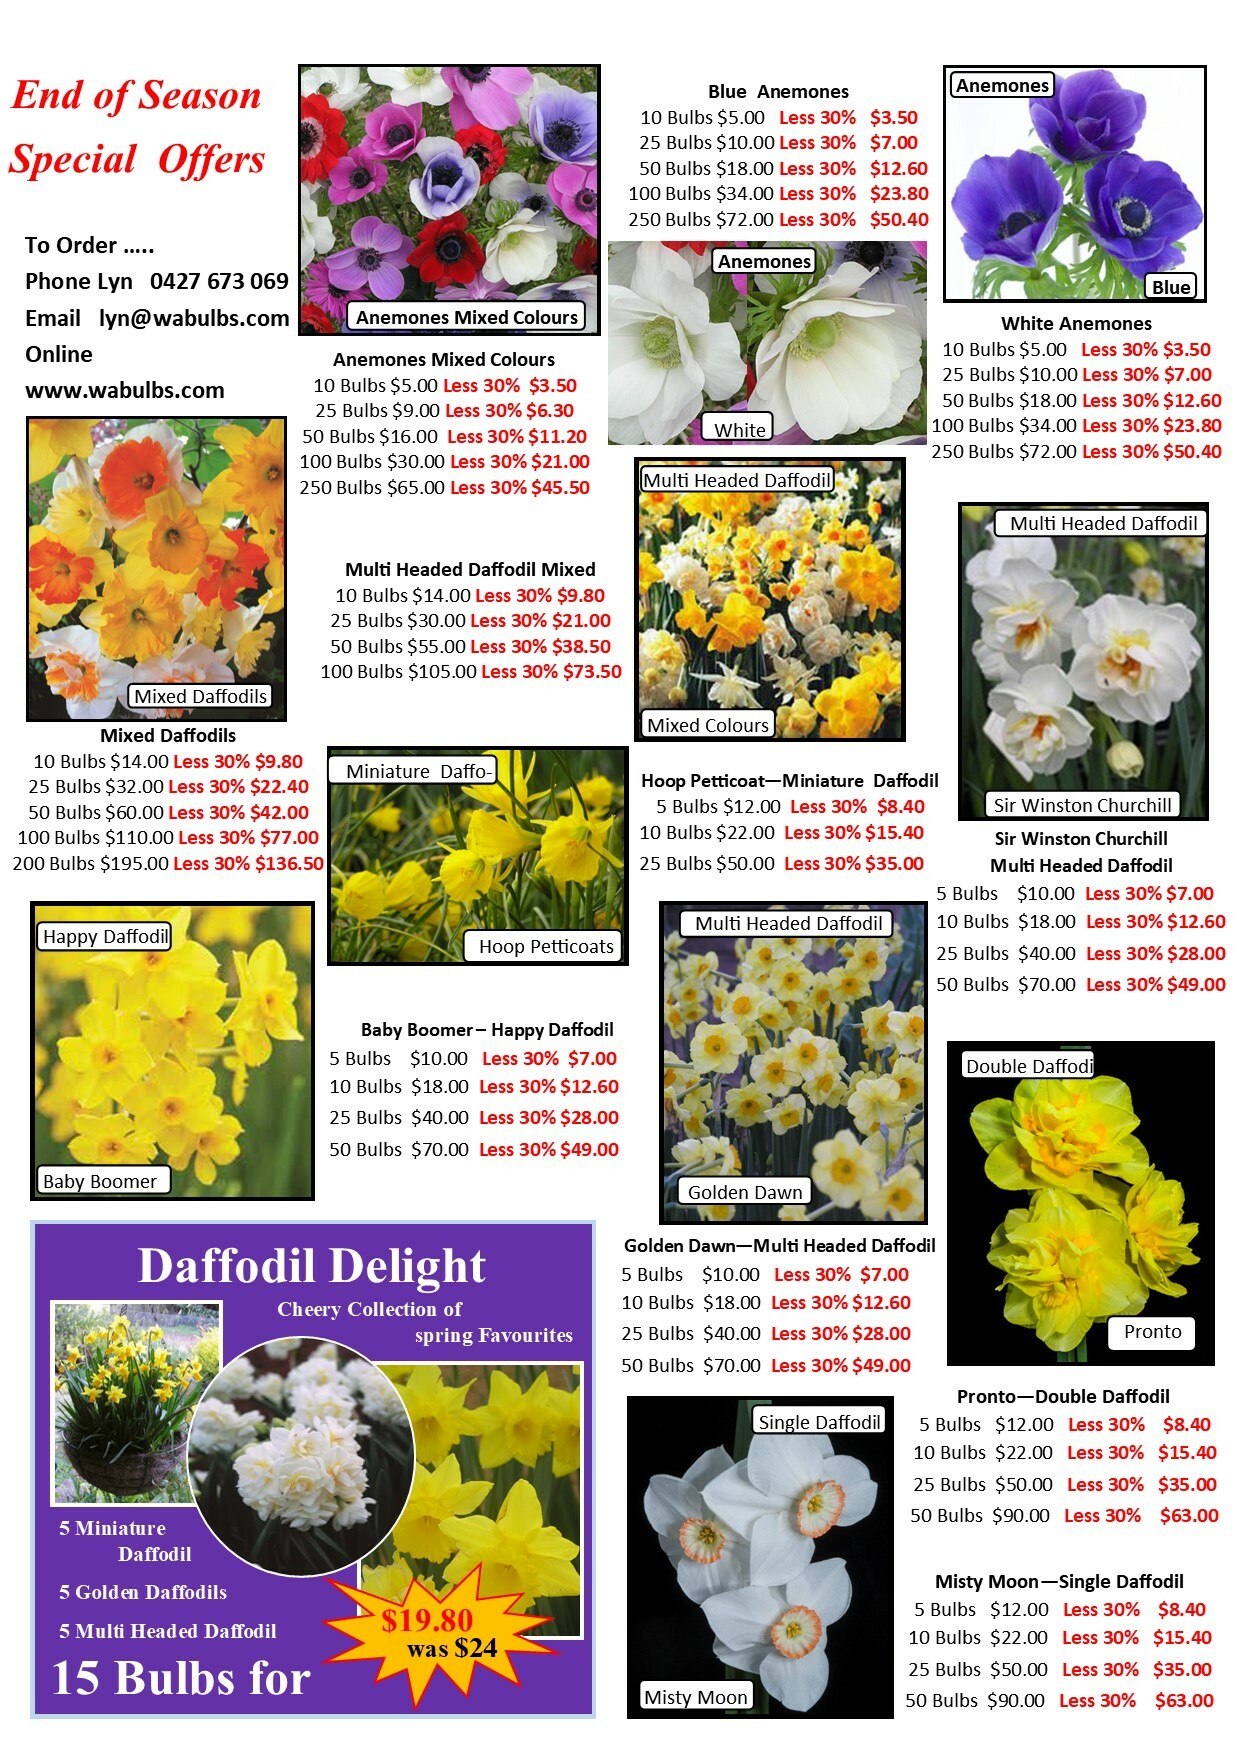 special-offer-last-chance-for-spring-flowering-bulbs-page-2..jpg